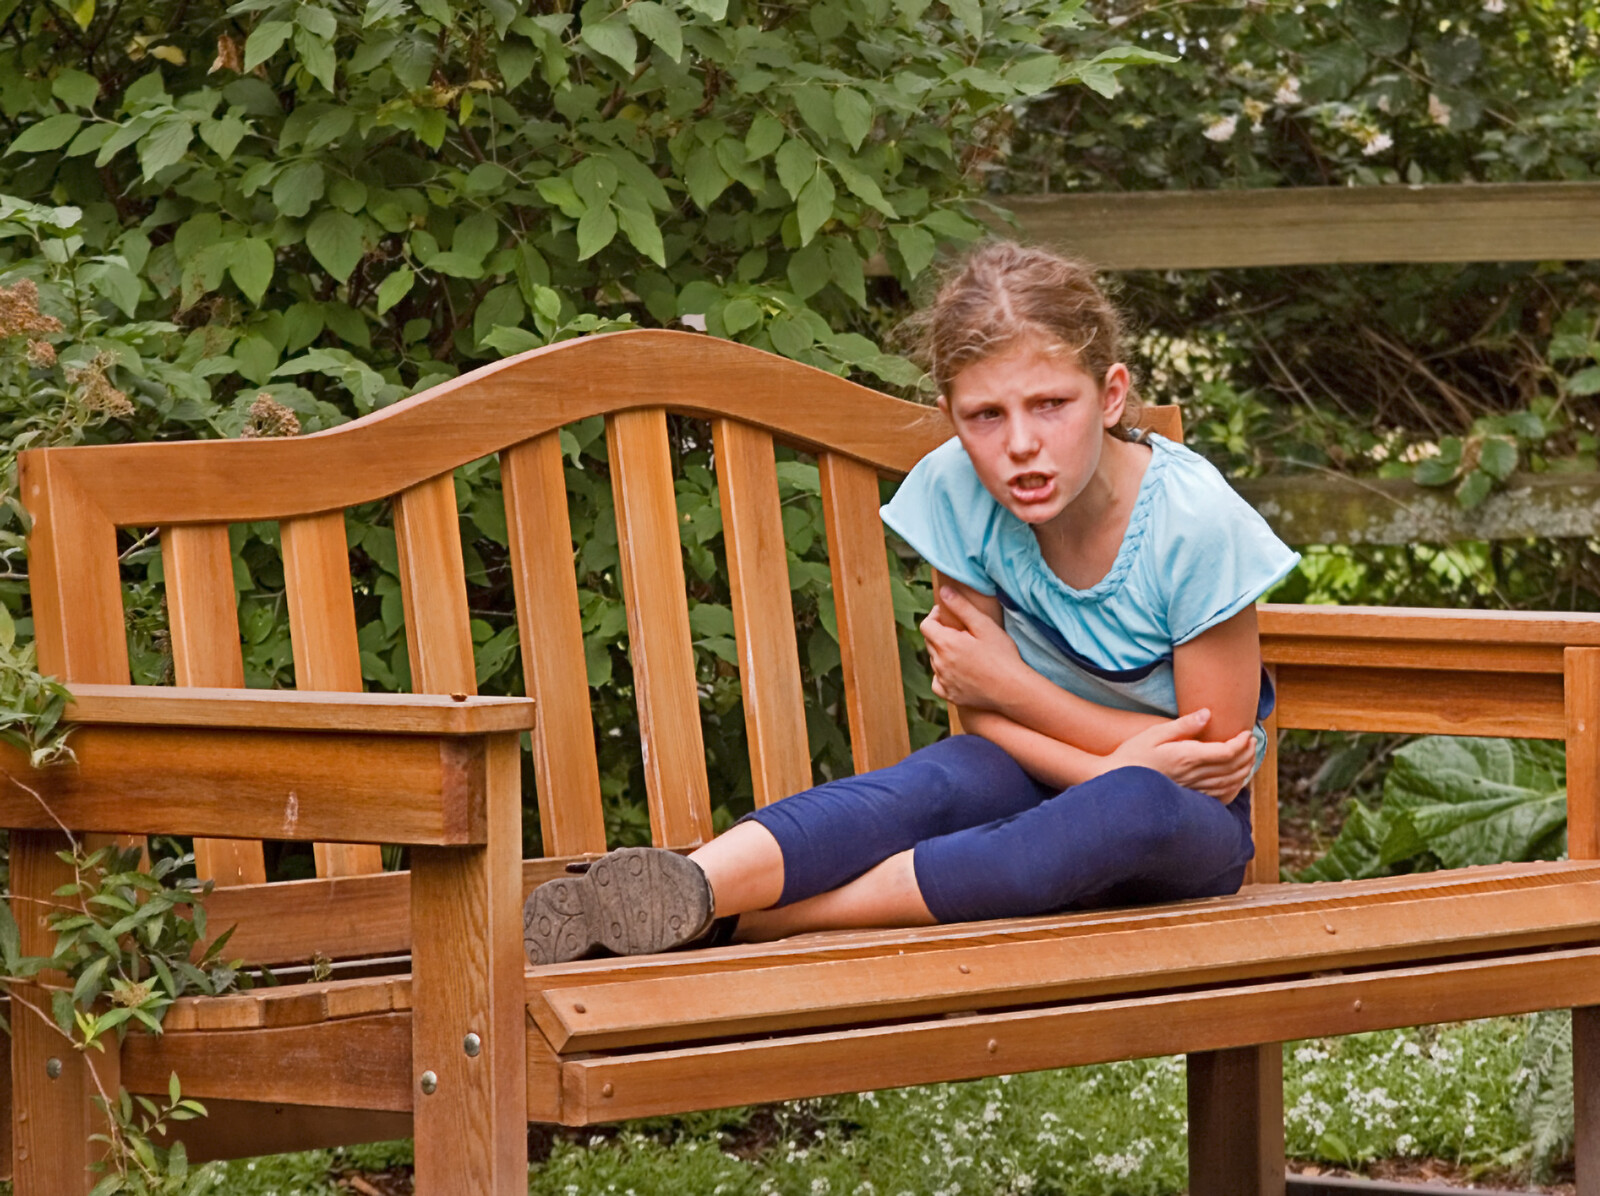 Girl on a bench upset. Photo is part of an article on understanding what it means to be on the spectrum.